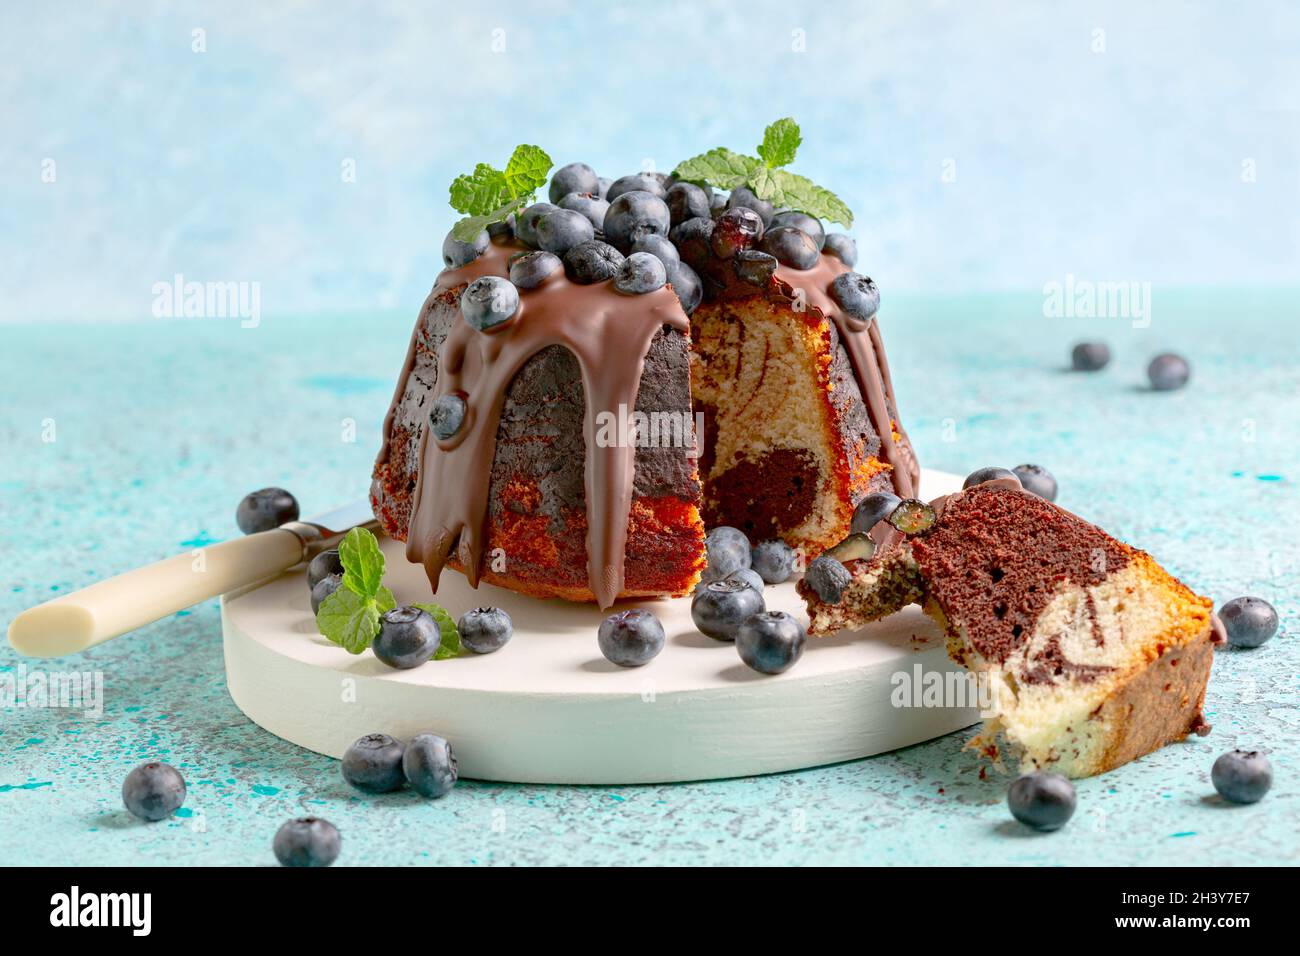 Marble bundt cake with chocolate icing and blueberries. Stock Photo